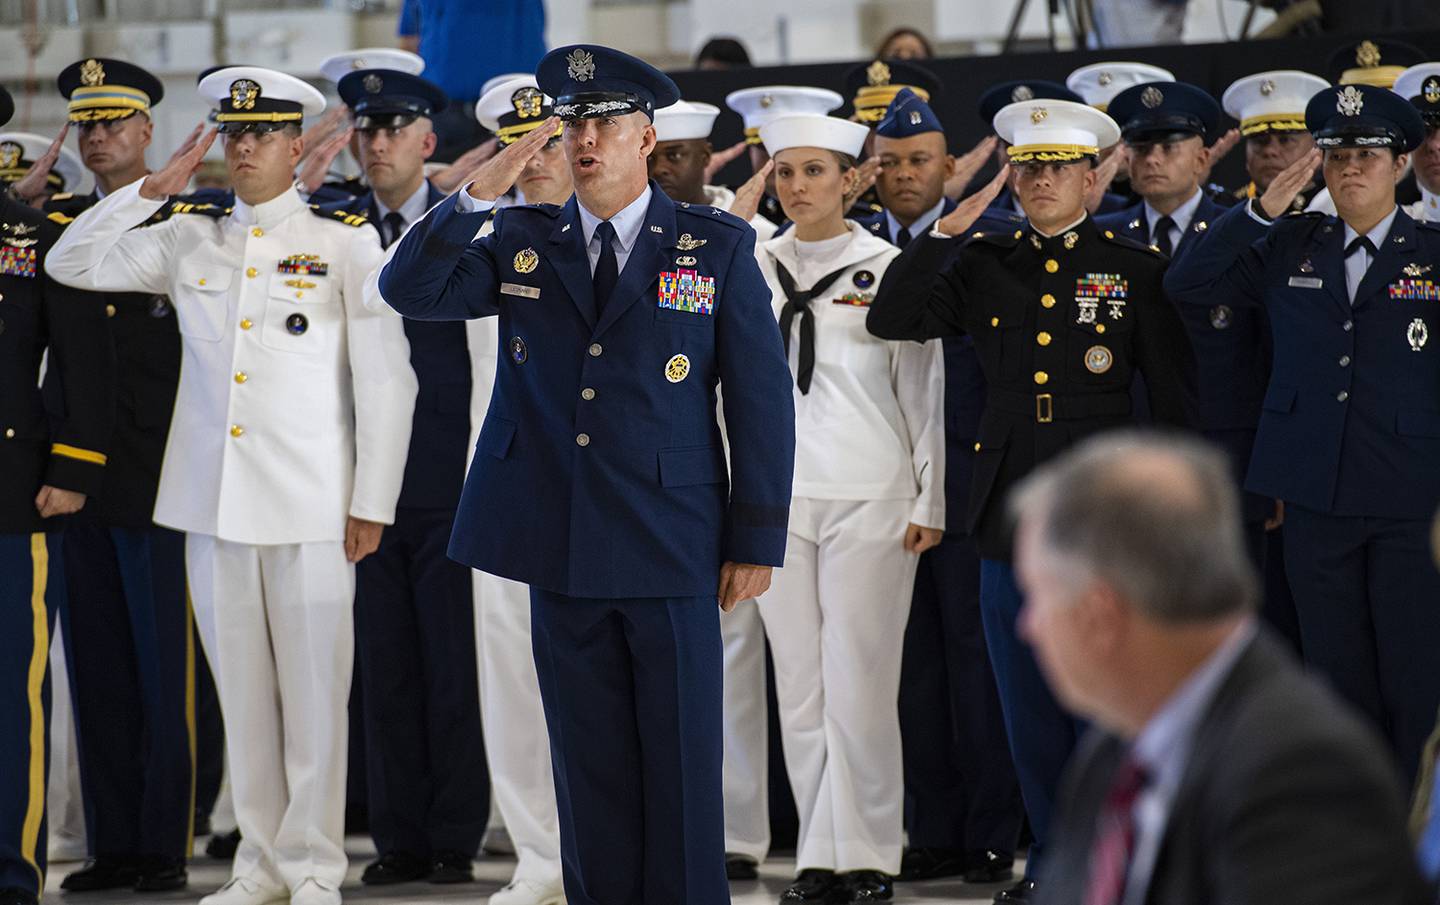 U.S. Space Command Chief of Staff, Brig. Gen. Brook Leonard, and the rest of his staff give their first salute to Commander Gen. John W. Raymond